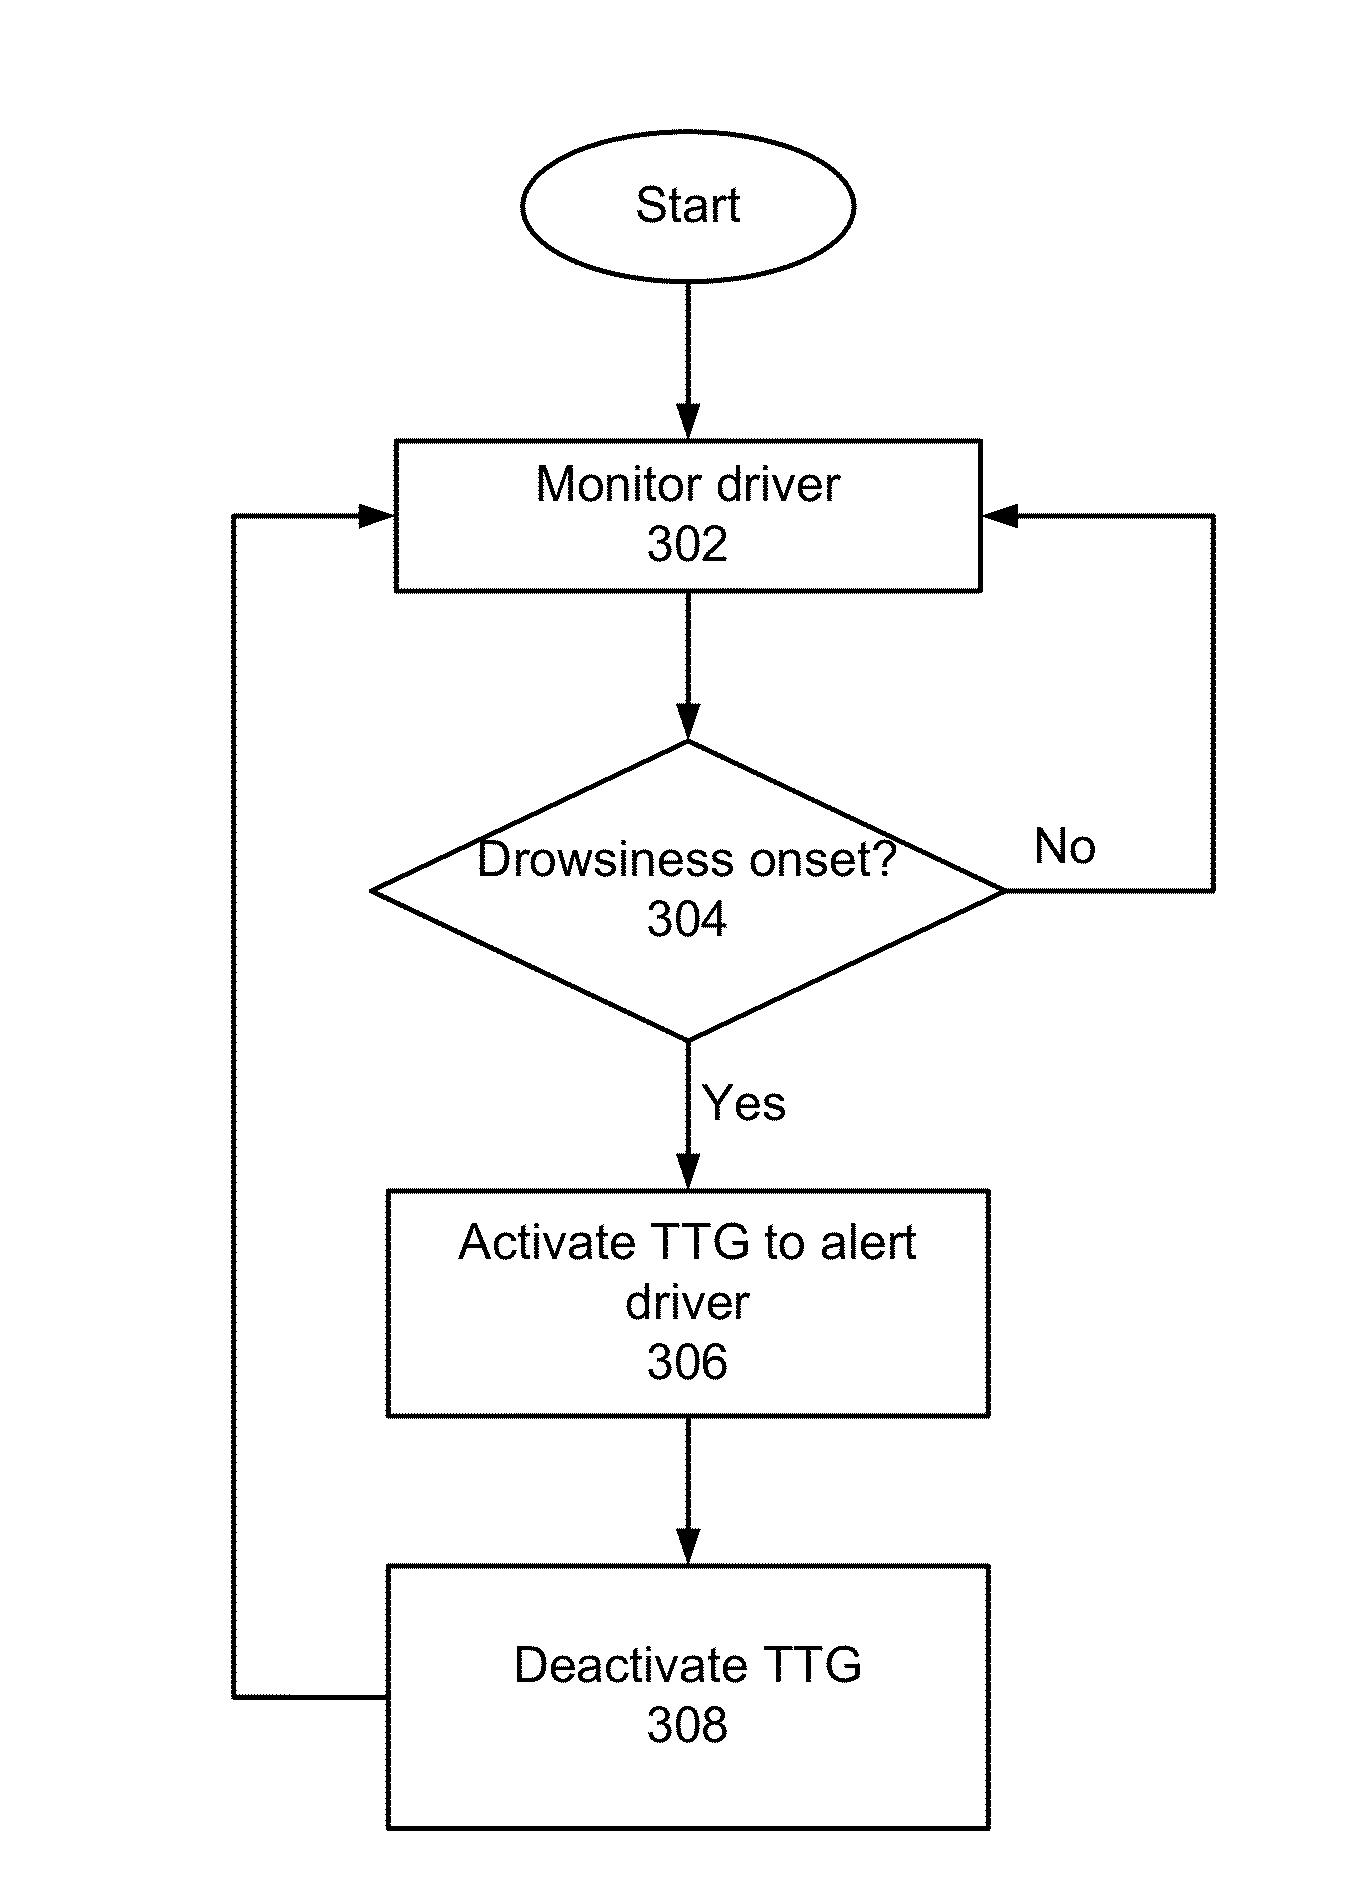 System and method for detecting and preventing drowsiness